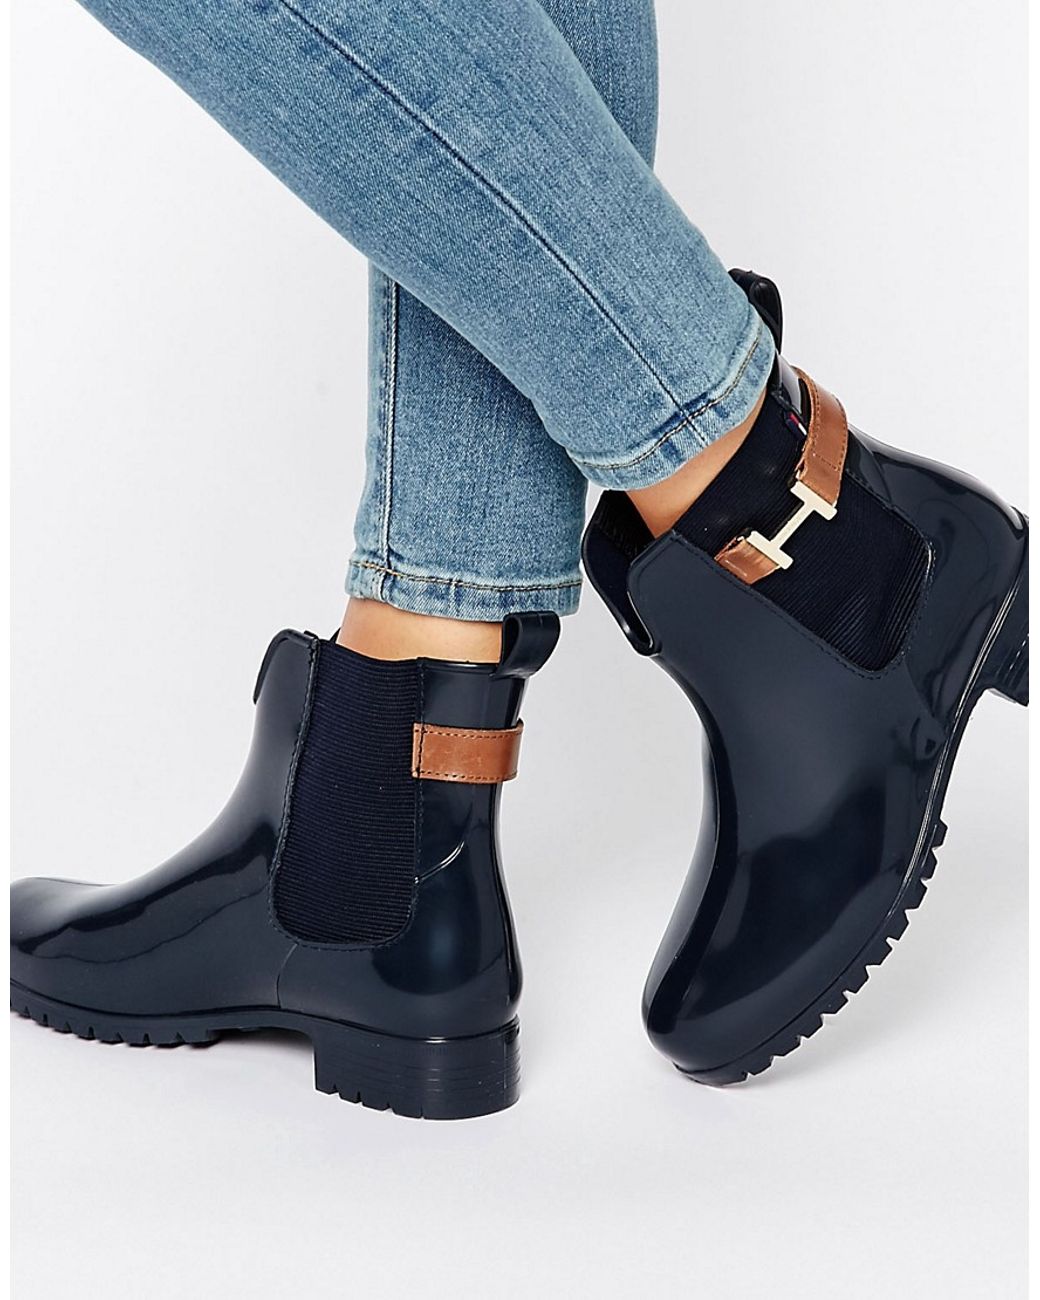 Tommy Hilfiger Oxley Chelsea Boot Gumboots - Navy in Blue | Lyst Australia